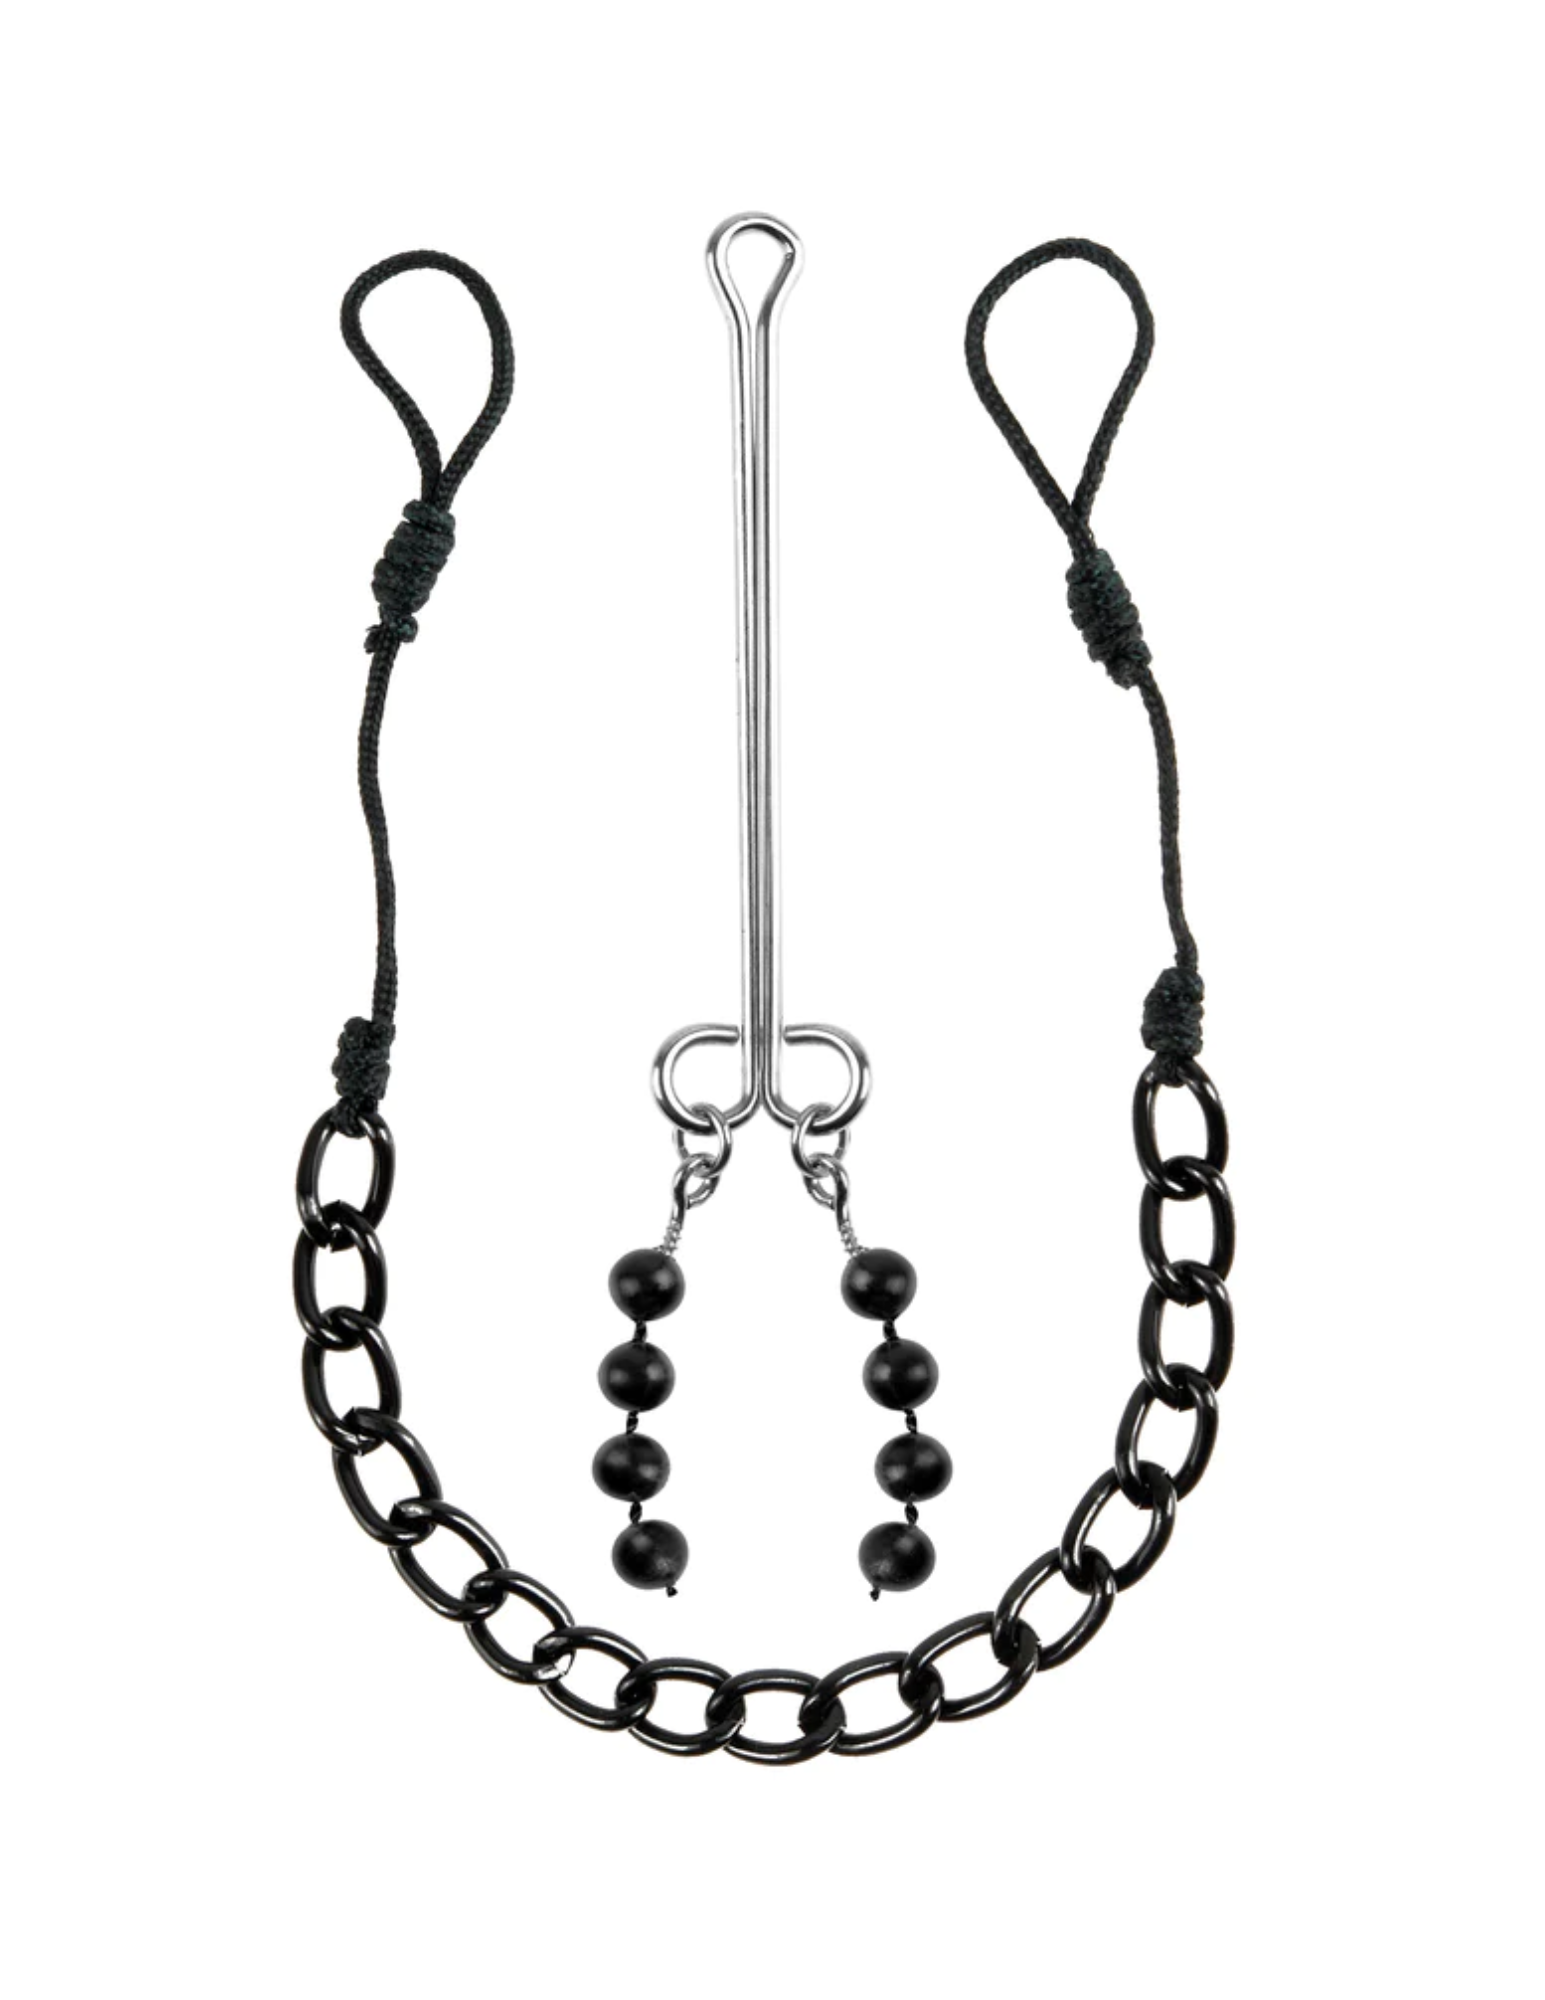 Photo shows the Fetish Fantasy Series Nipple and Clitoral Jewelry from Pipedreams (black) .